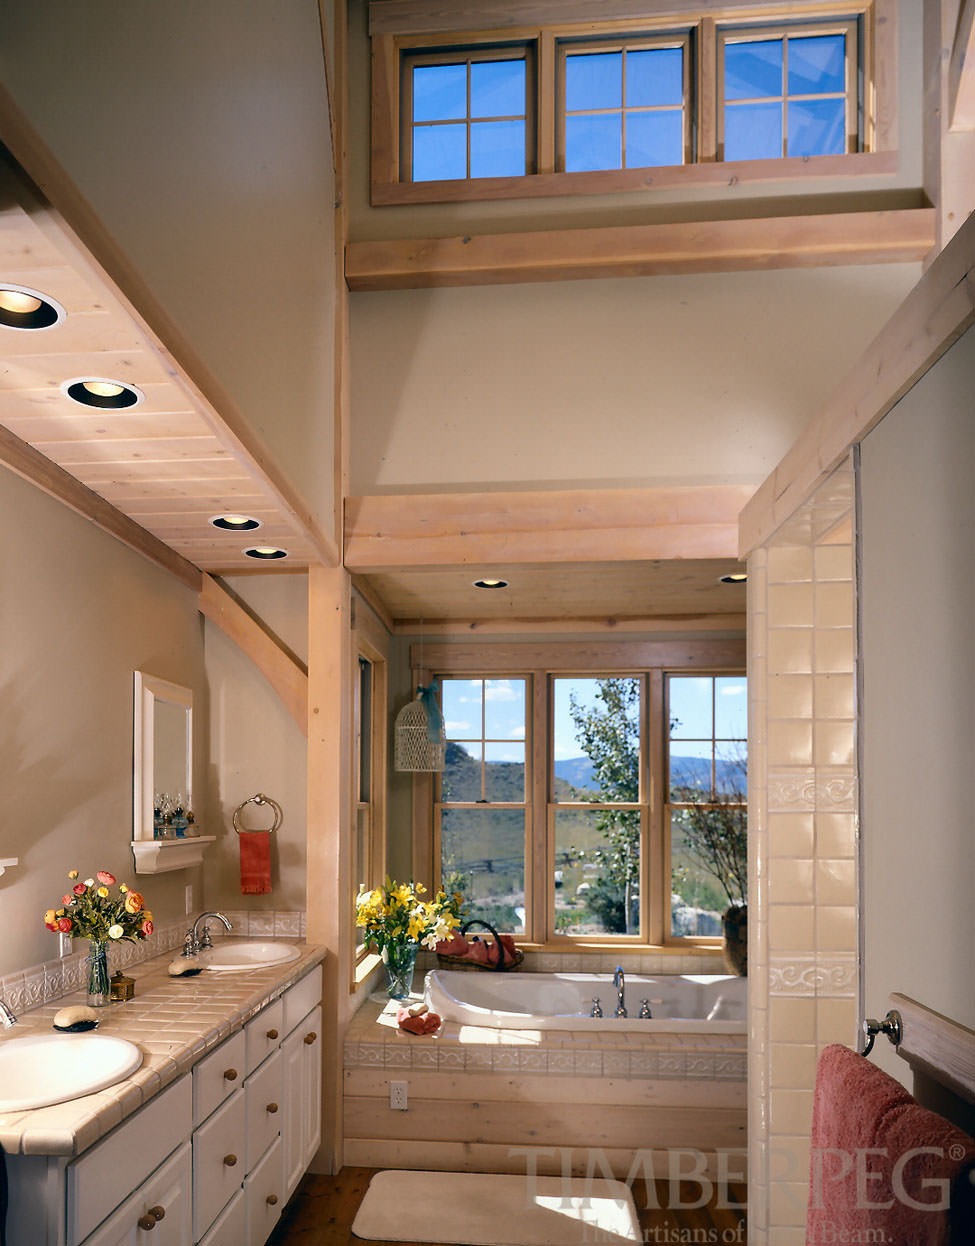 Granby, CO (4921) bathroom with bathtub surrounded by windows and views of the mountains